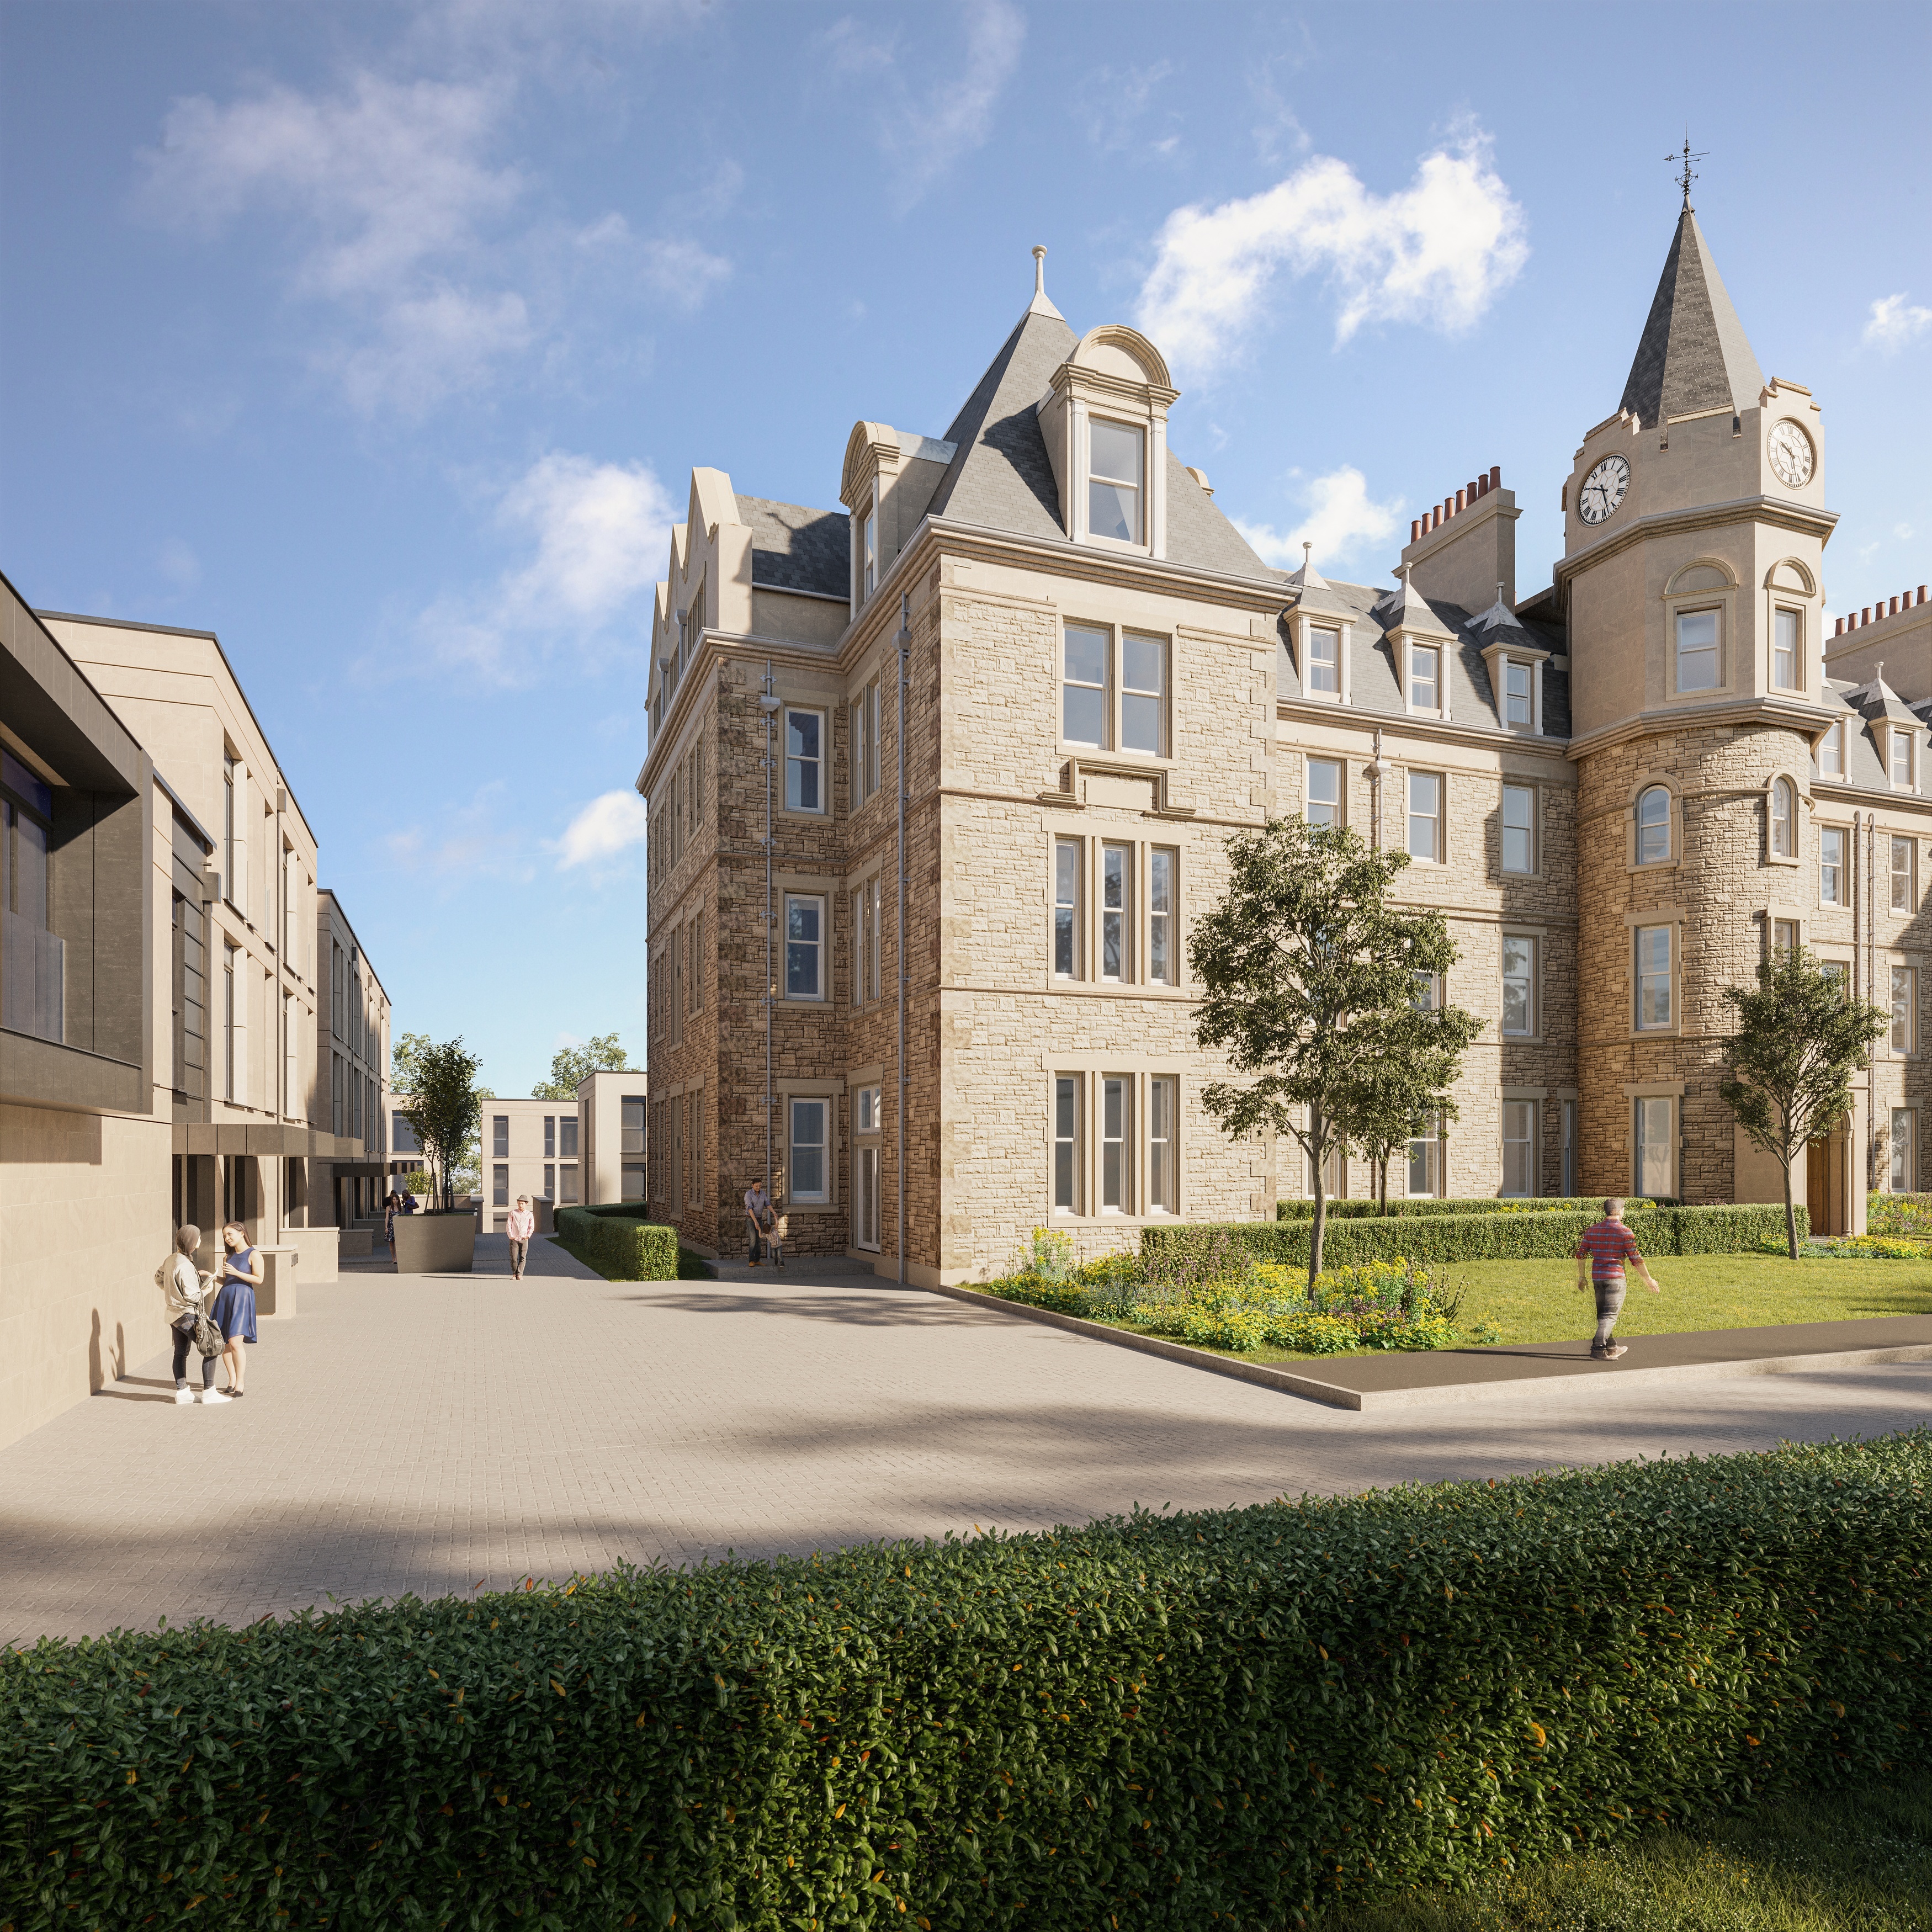 Cala Homes partners with Edinburgh College of Art to create artworks for Newington Residences